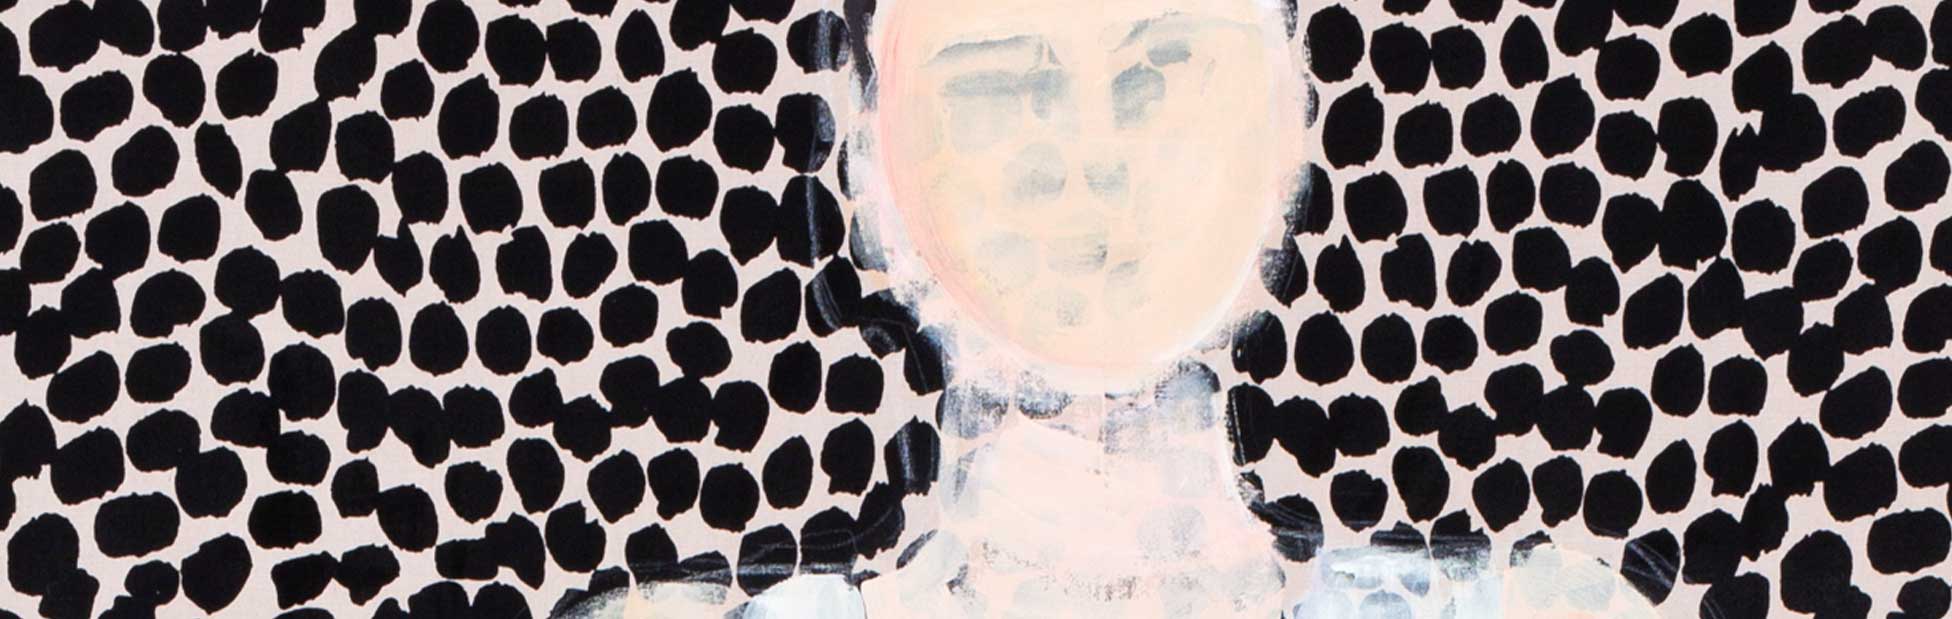 Painting resembling a girl with no face